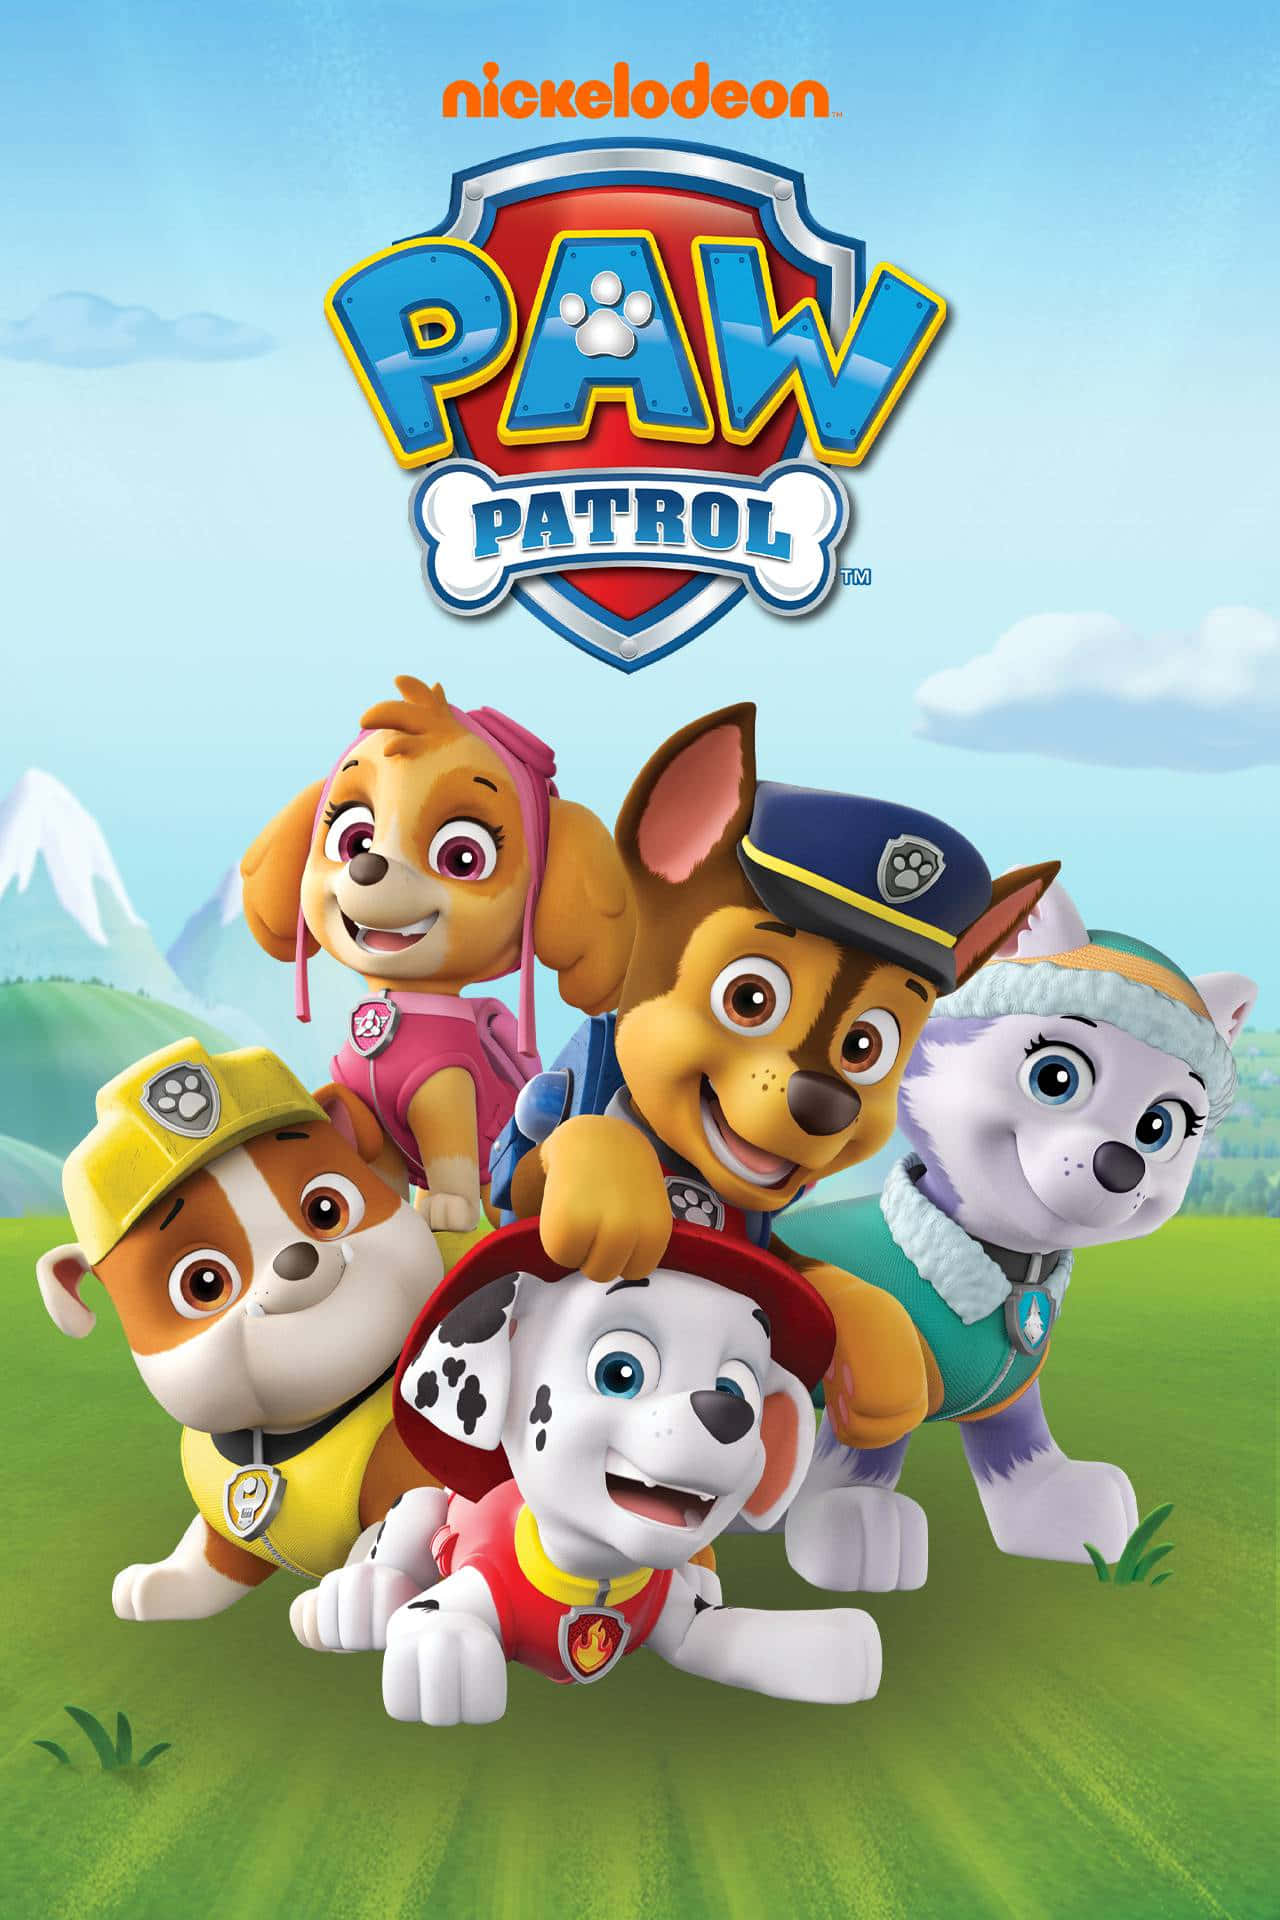 Join the Paw Patrol to save the day!